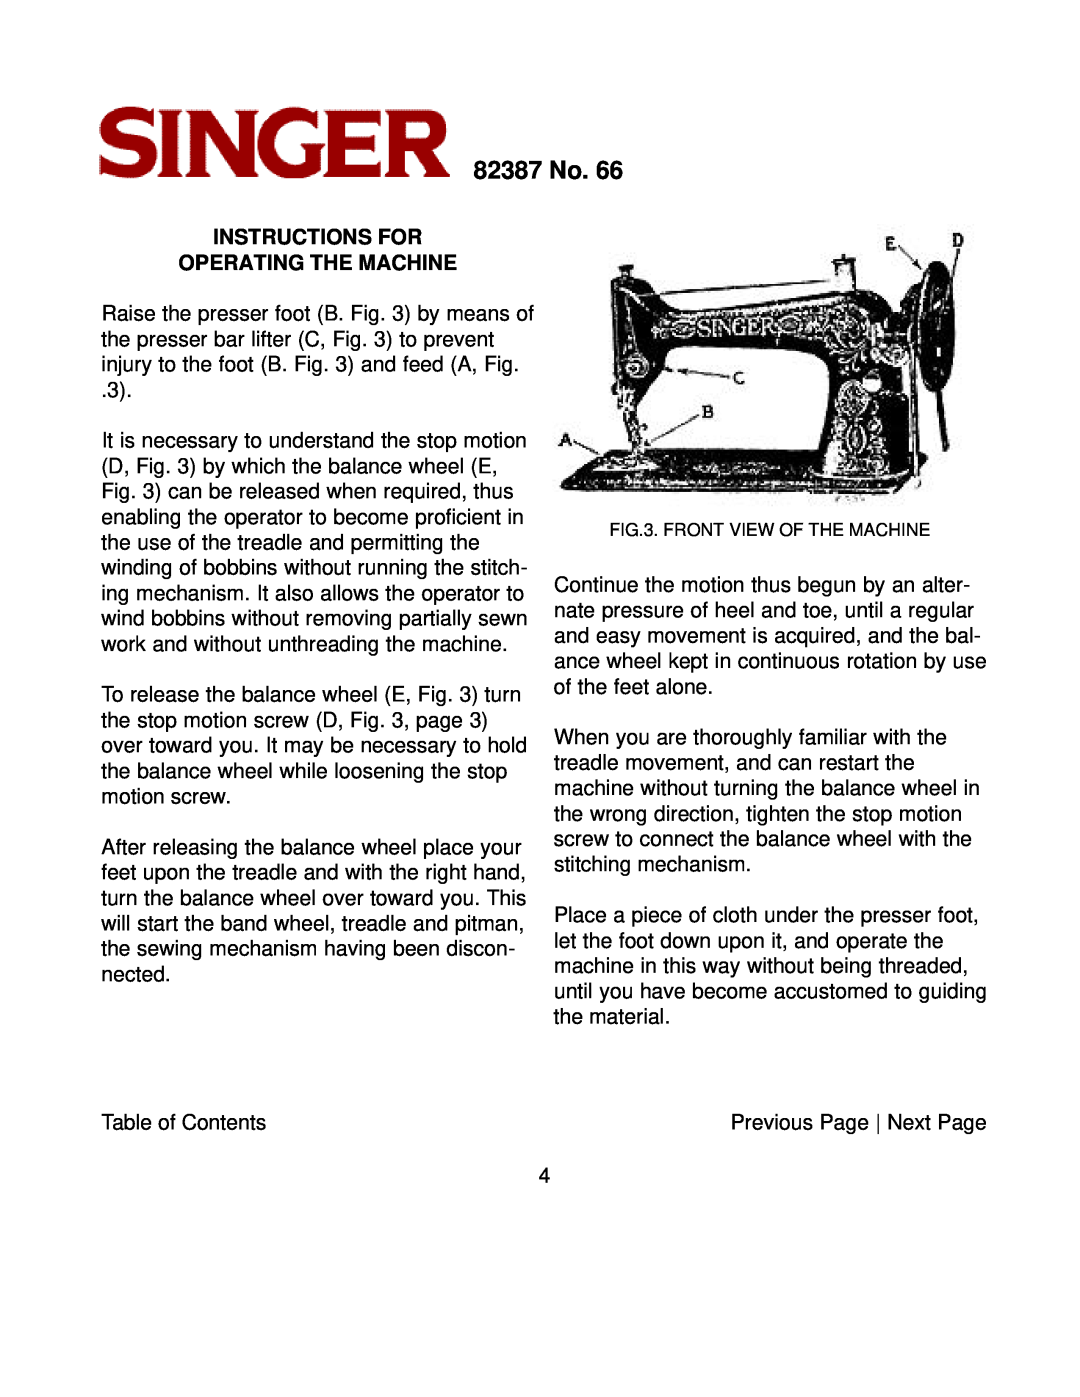 Singer instruction manual Instructions For Operating The Machine, 82387 No, Front View Of The Machine 